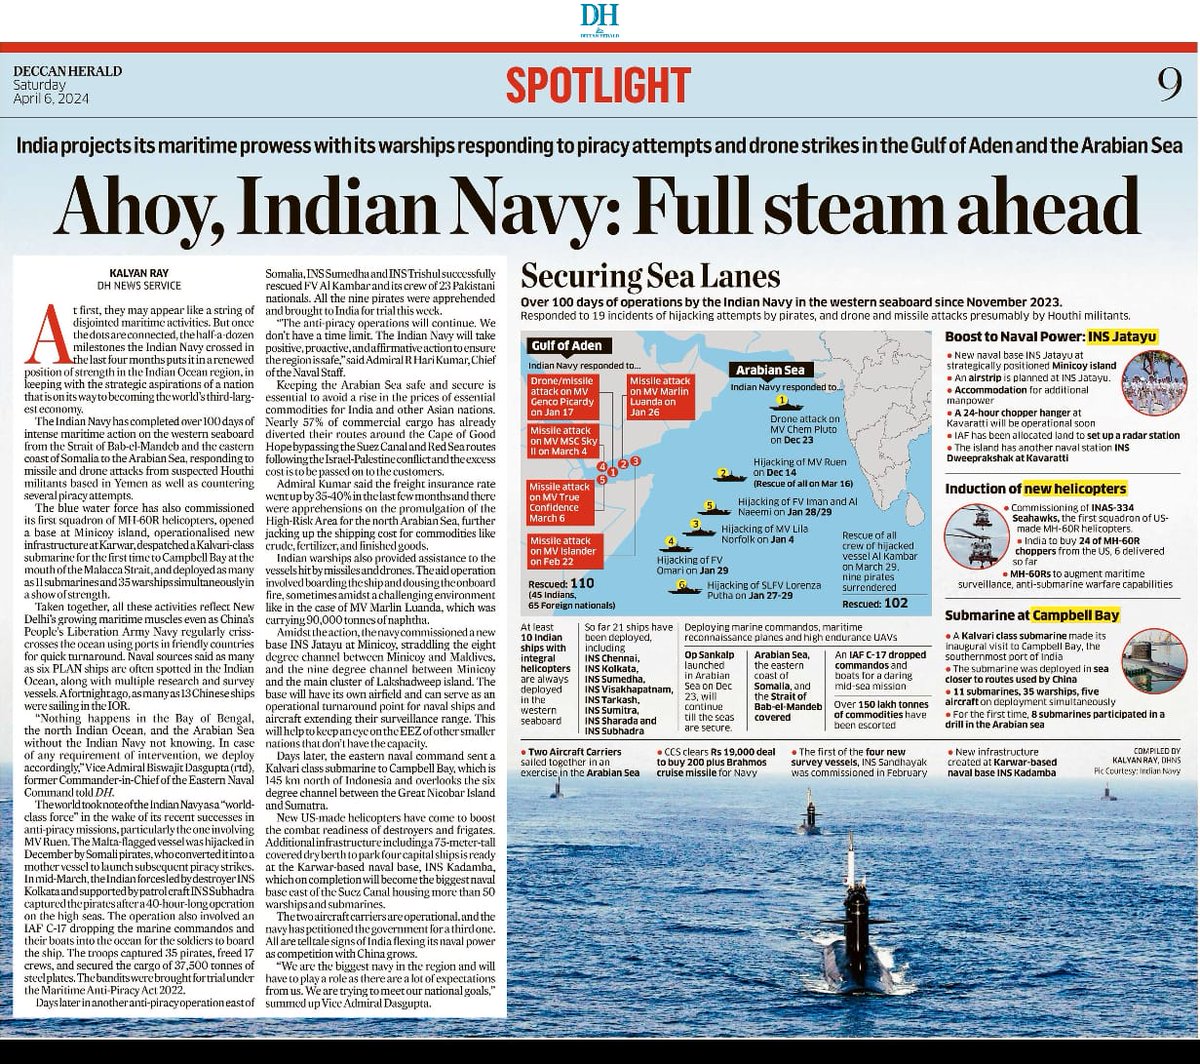 #GRSE-built INS Sandhayak's commissioning, highlighted in recent article by Deccan Herald! Dive into the details here.  #INSSandhayak #Commissioning #MaritimeIndustry #defence #IndianNavy #RMOIndia